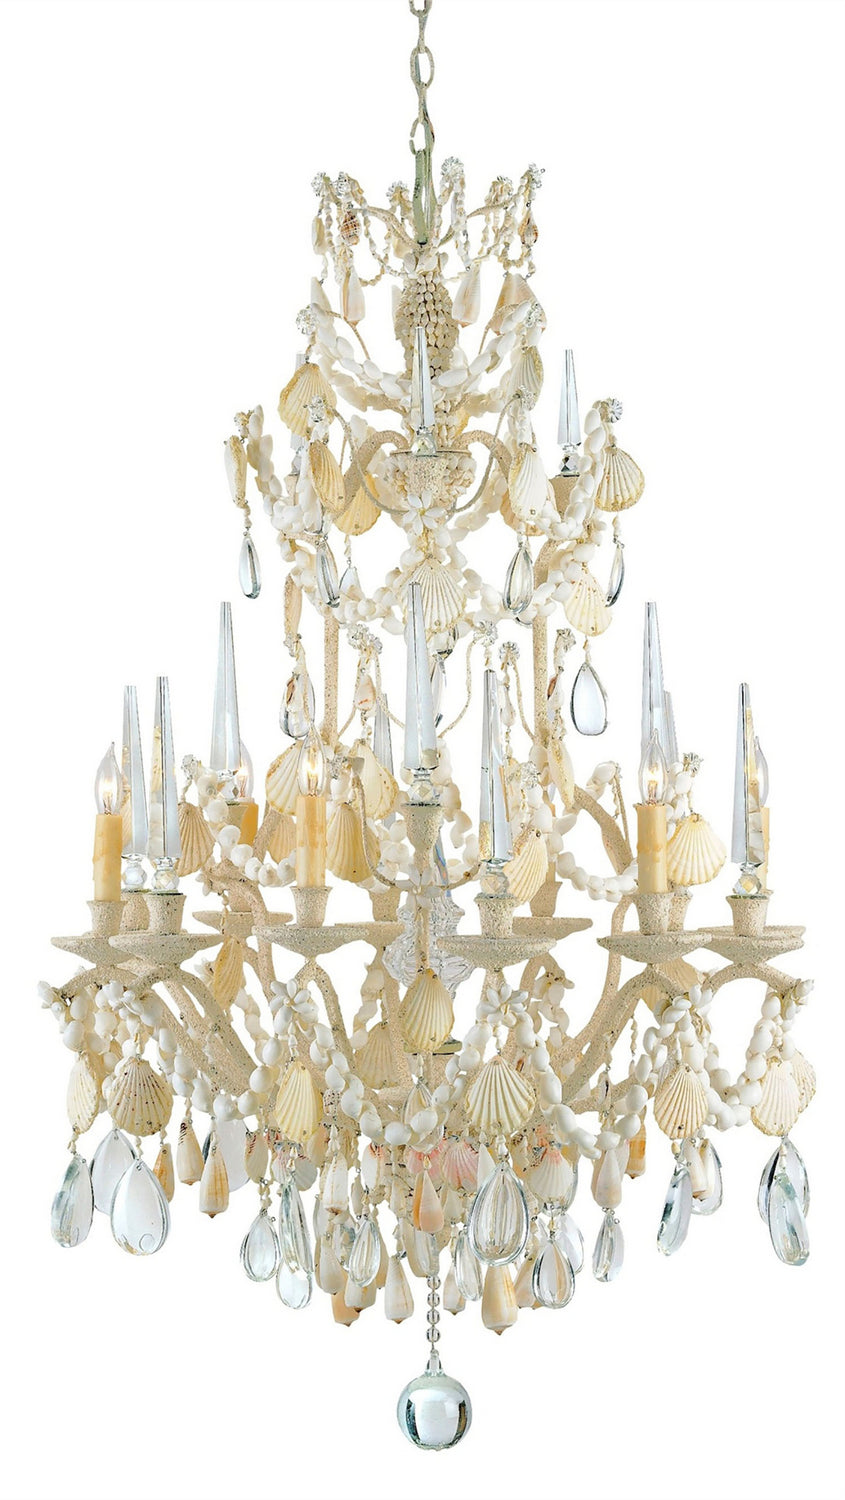 Six Light Chandelier from the Buttermere collection in Natural/Crushed Shell finish